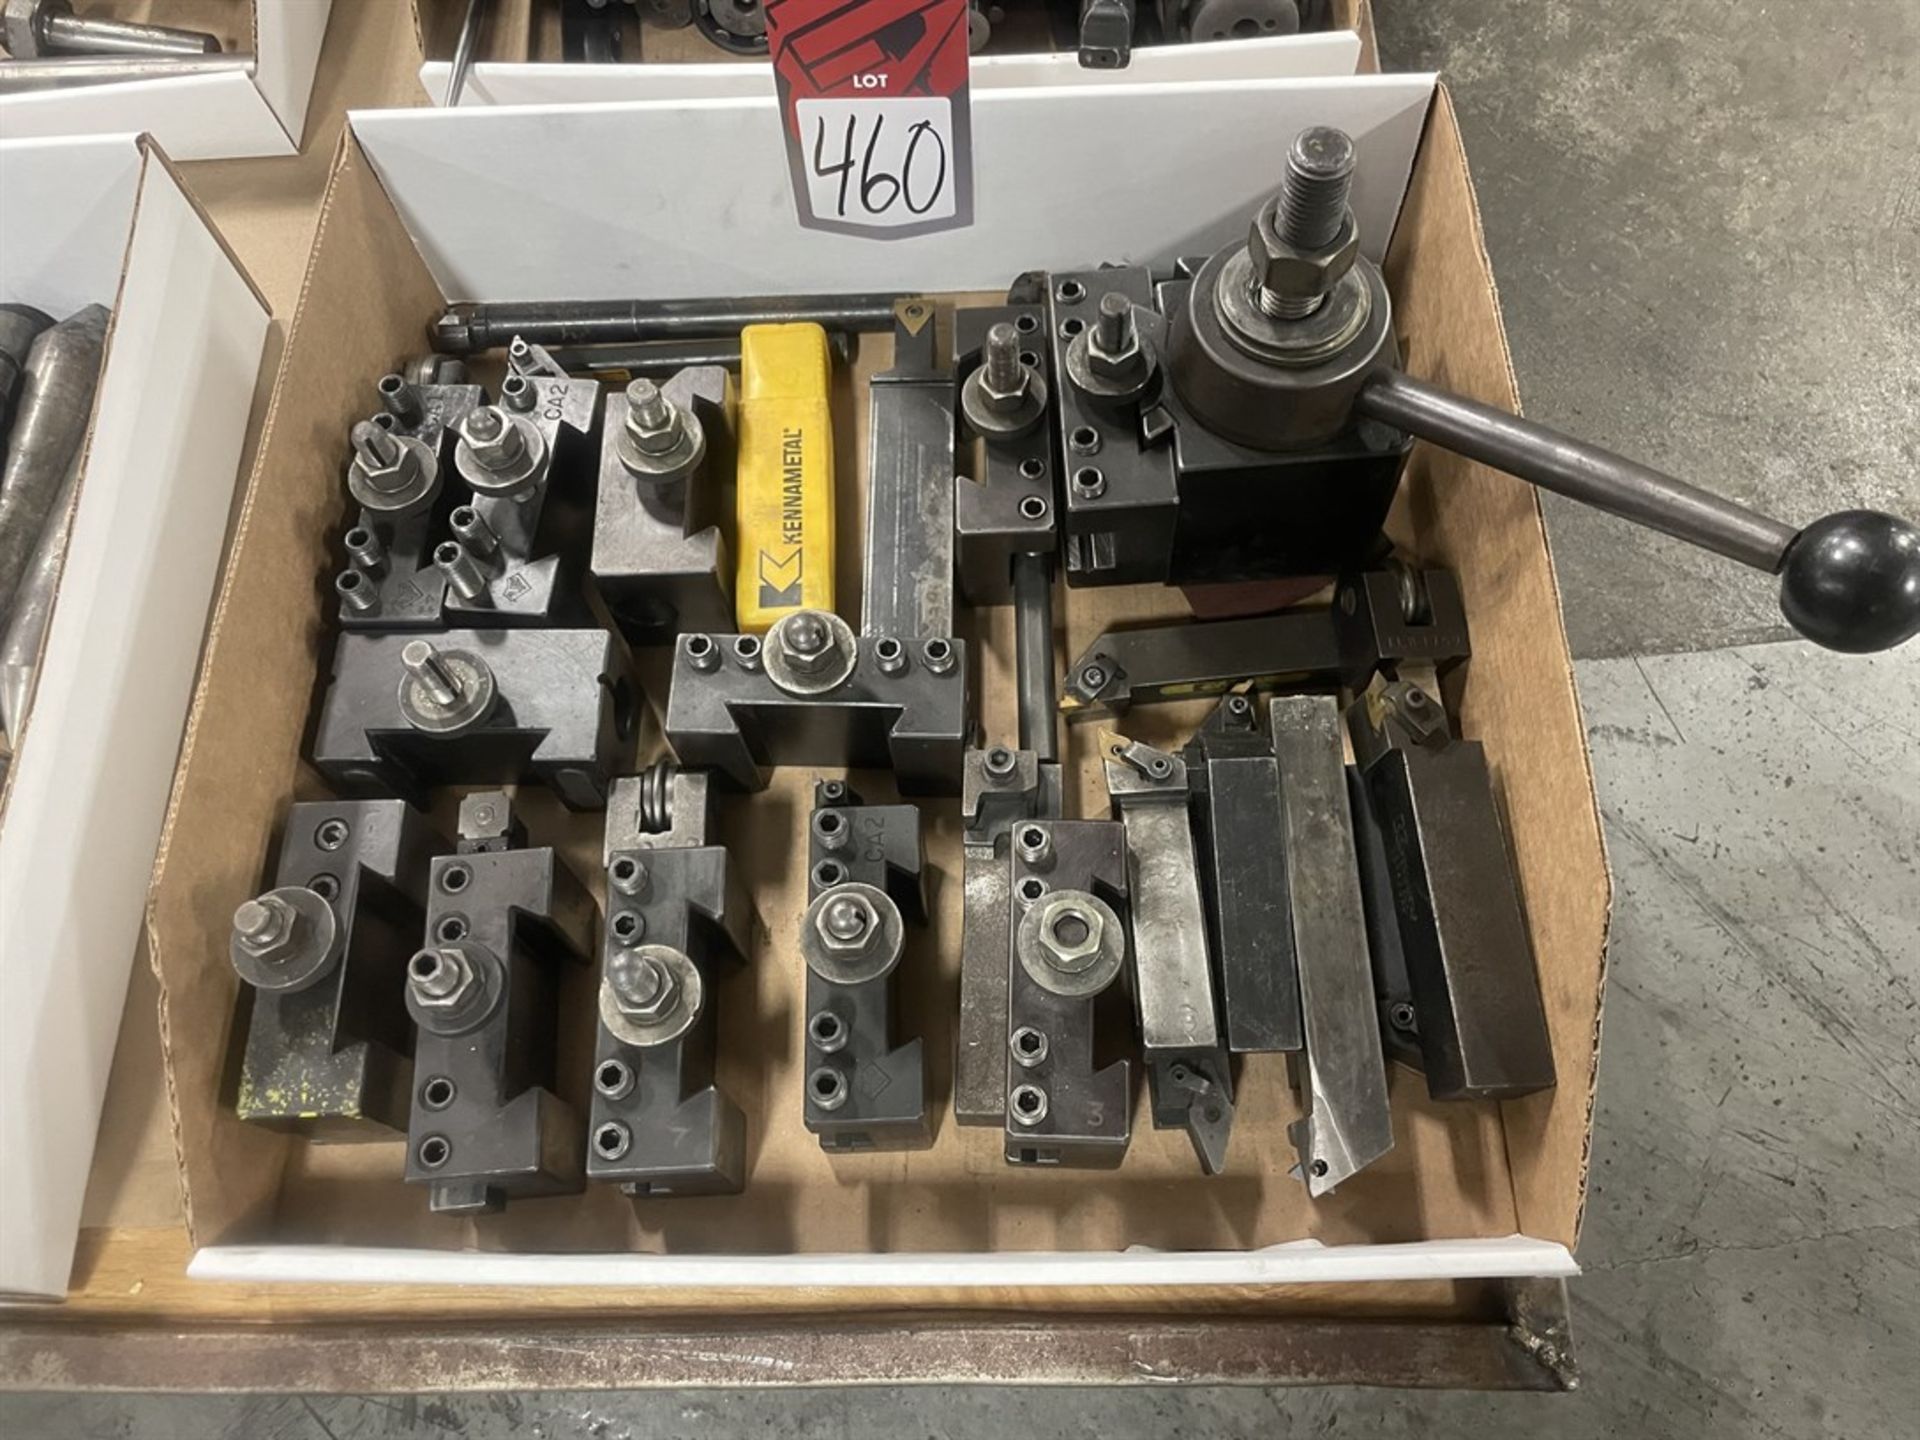 Lot Consisting of Quick Change Tool Post, Quick Change Tool Holders and Assorted Boring and